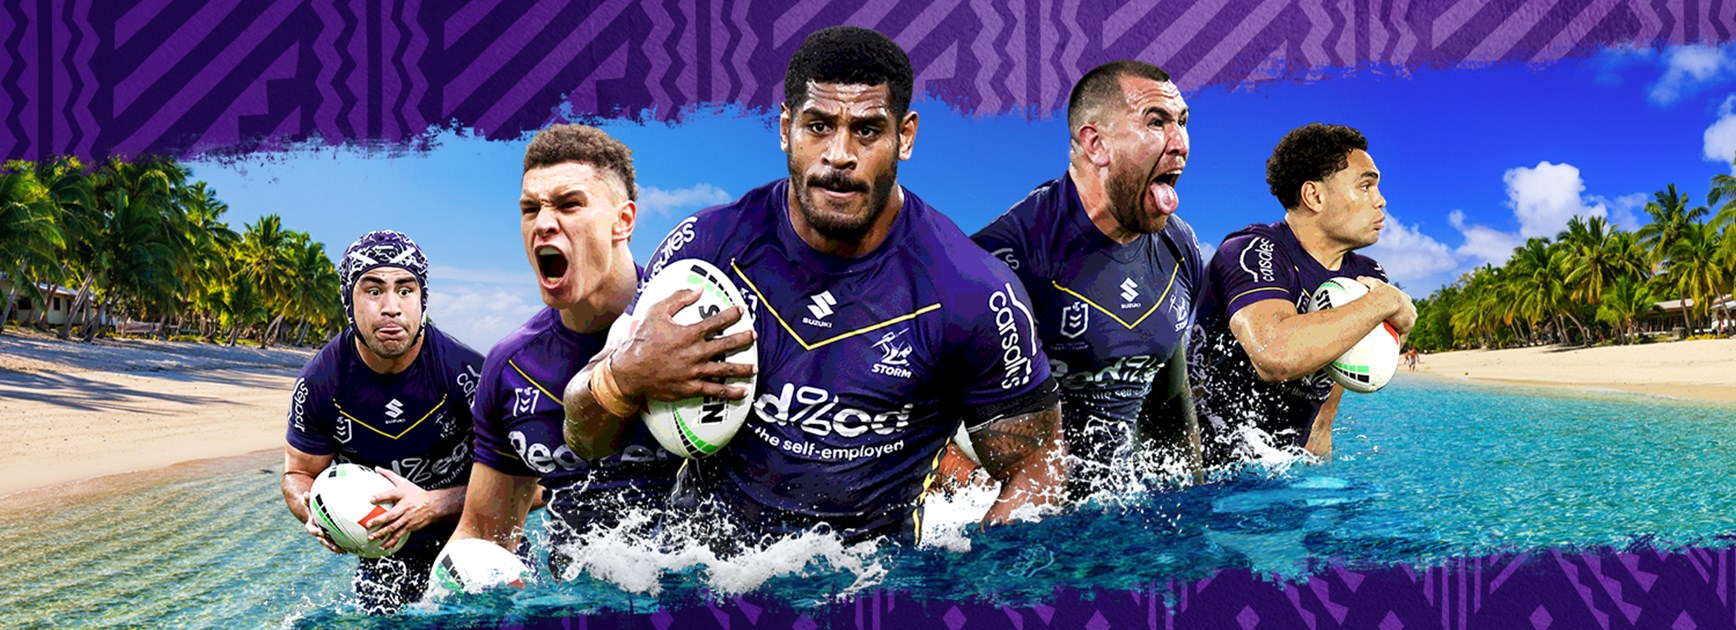 Storm to play historic Fiji game